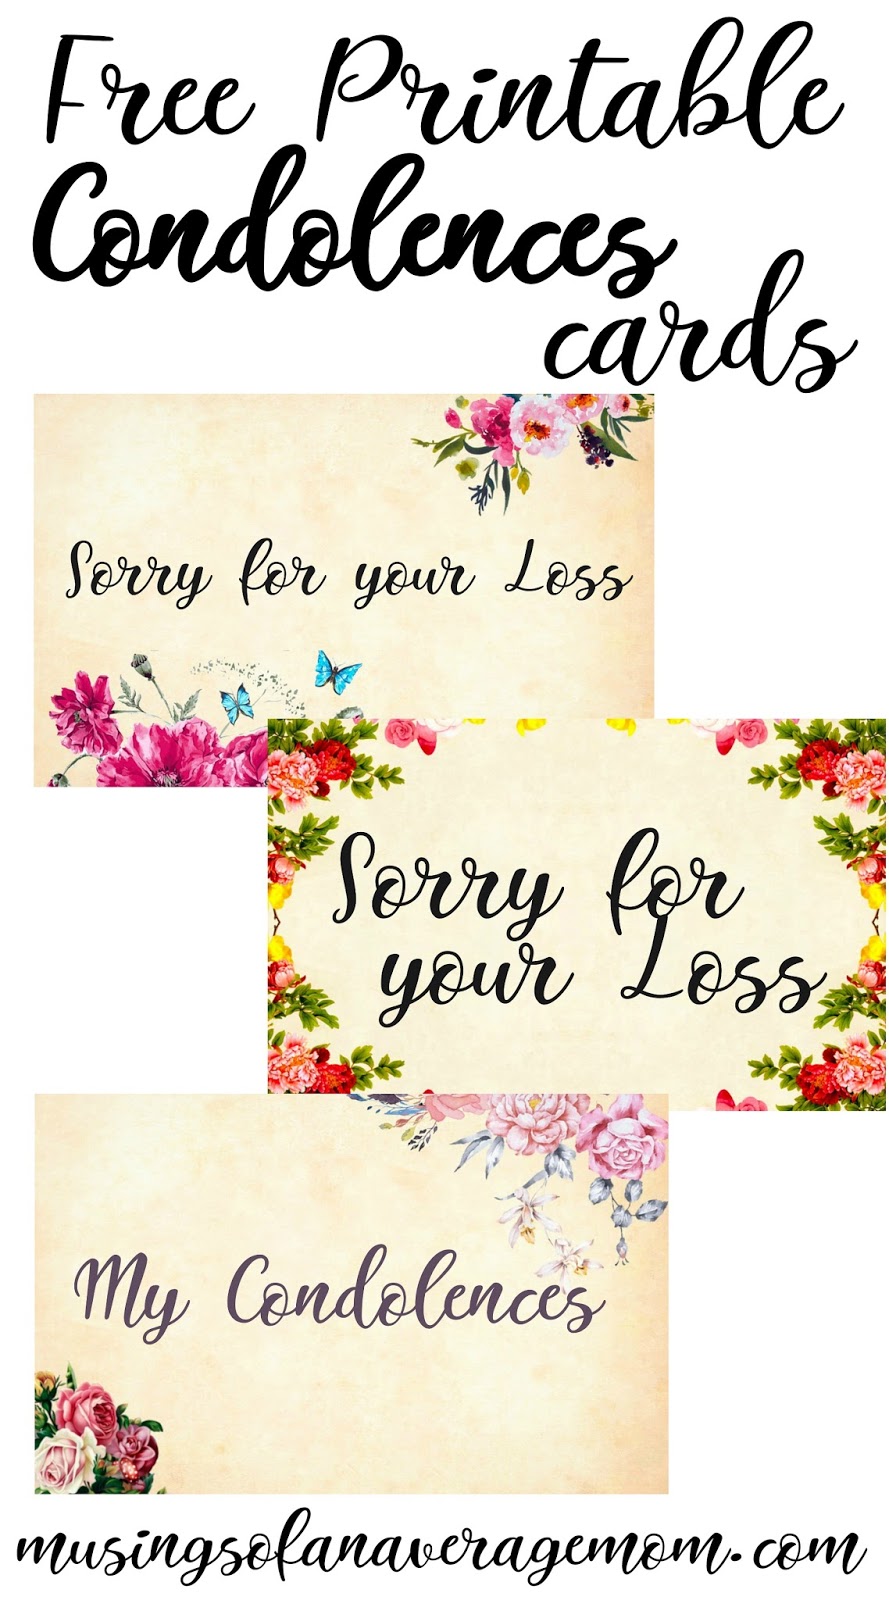 musings-of-an-average-mom-condolences-cards